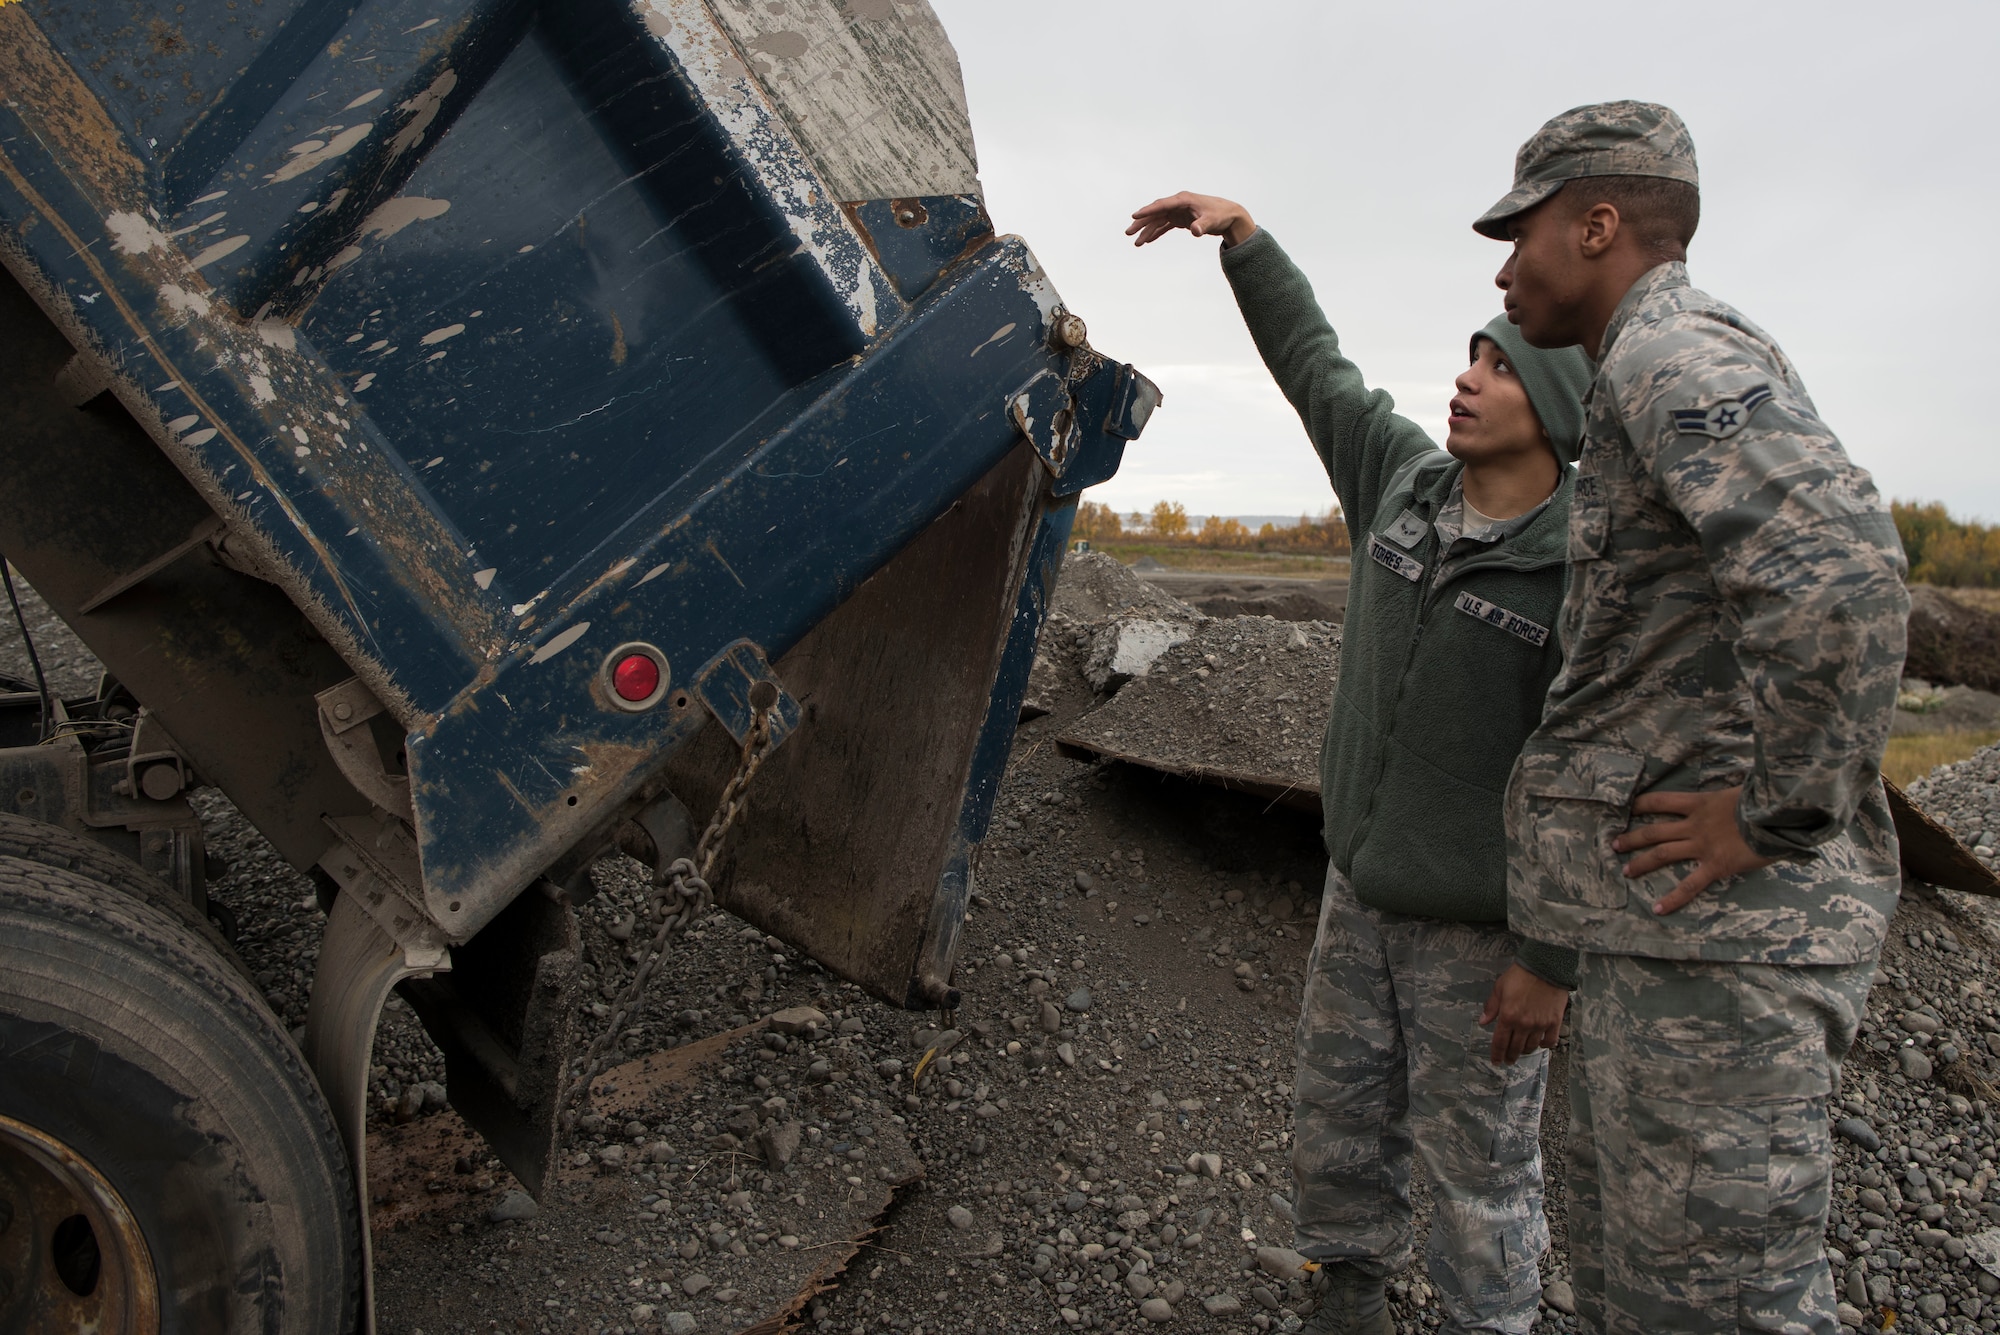 U.S. Air Force Airman 1st Class Isaiah Torres, 773d Civil Engineer Squadron pavement and construction operator, explains the proper methods of unloading a dump truck to Airman 1st Class Shane Leaphart, 773d CES engineer assistant, at Joint Base Elmendorf-Richardson, Alaska, Oct. 3, 2018. The 773d CES snow barn personnel train augmentees on properly operating snow-removal equipment, in preparation for the coming winter.